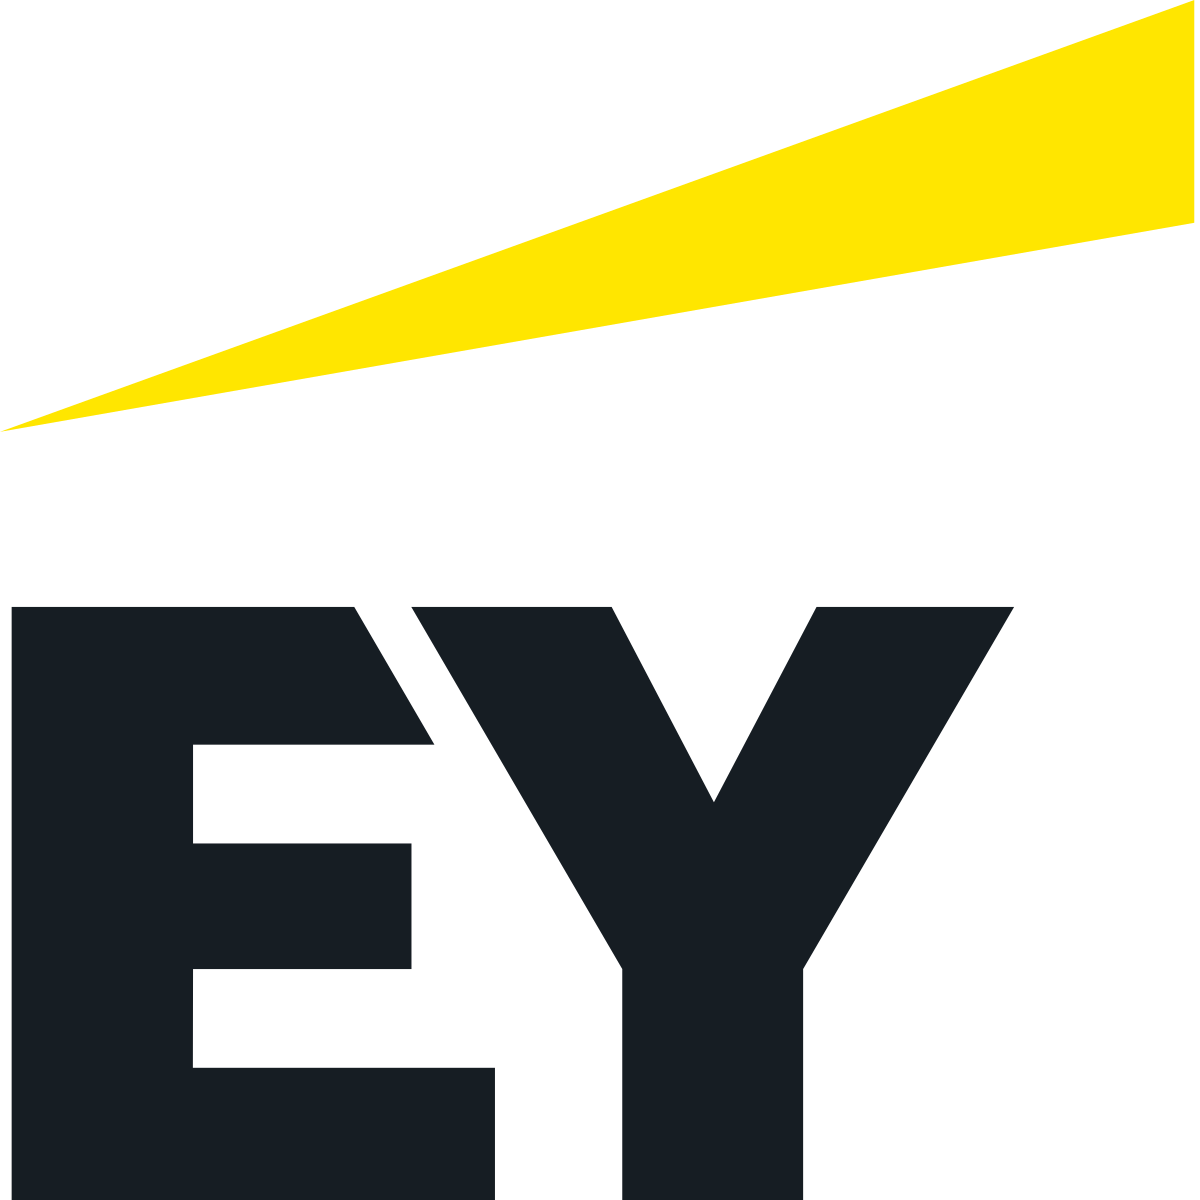 big four accounting firms salary - ernst & young ey